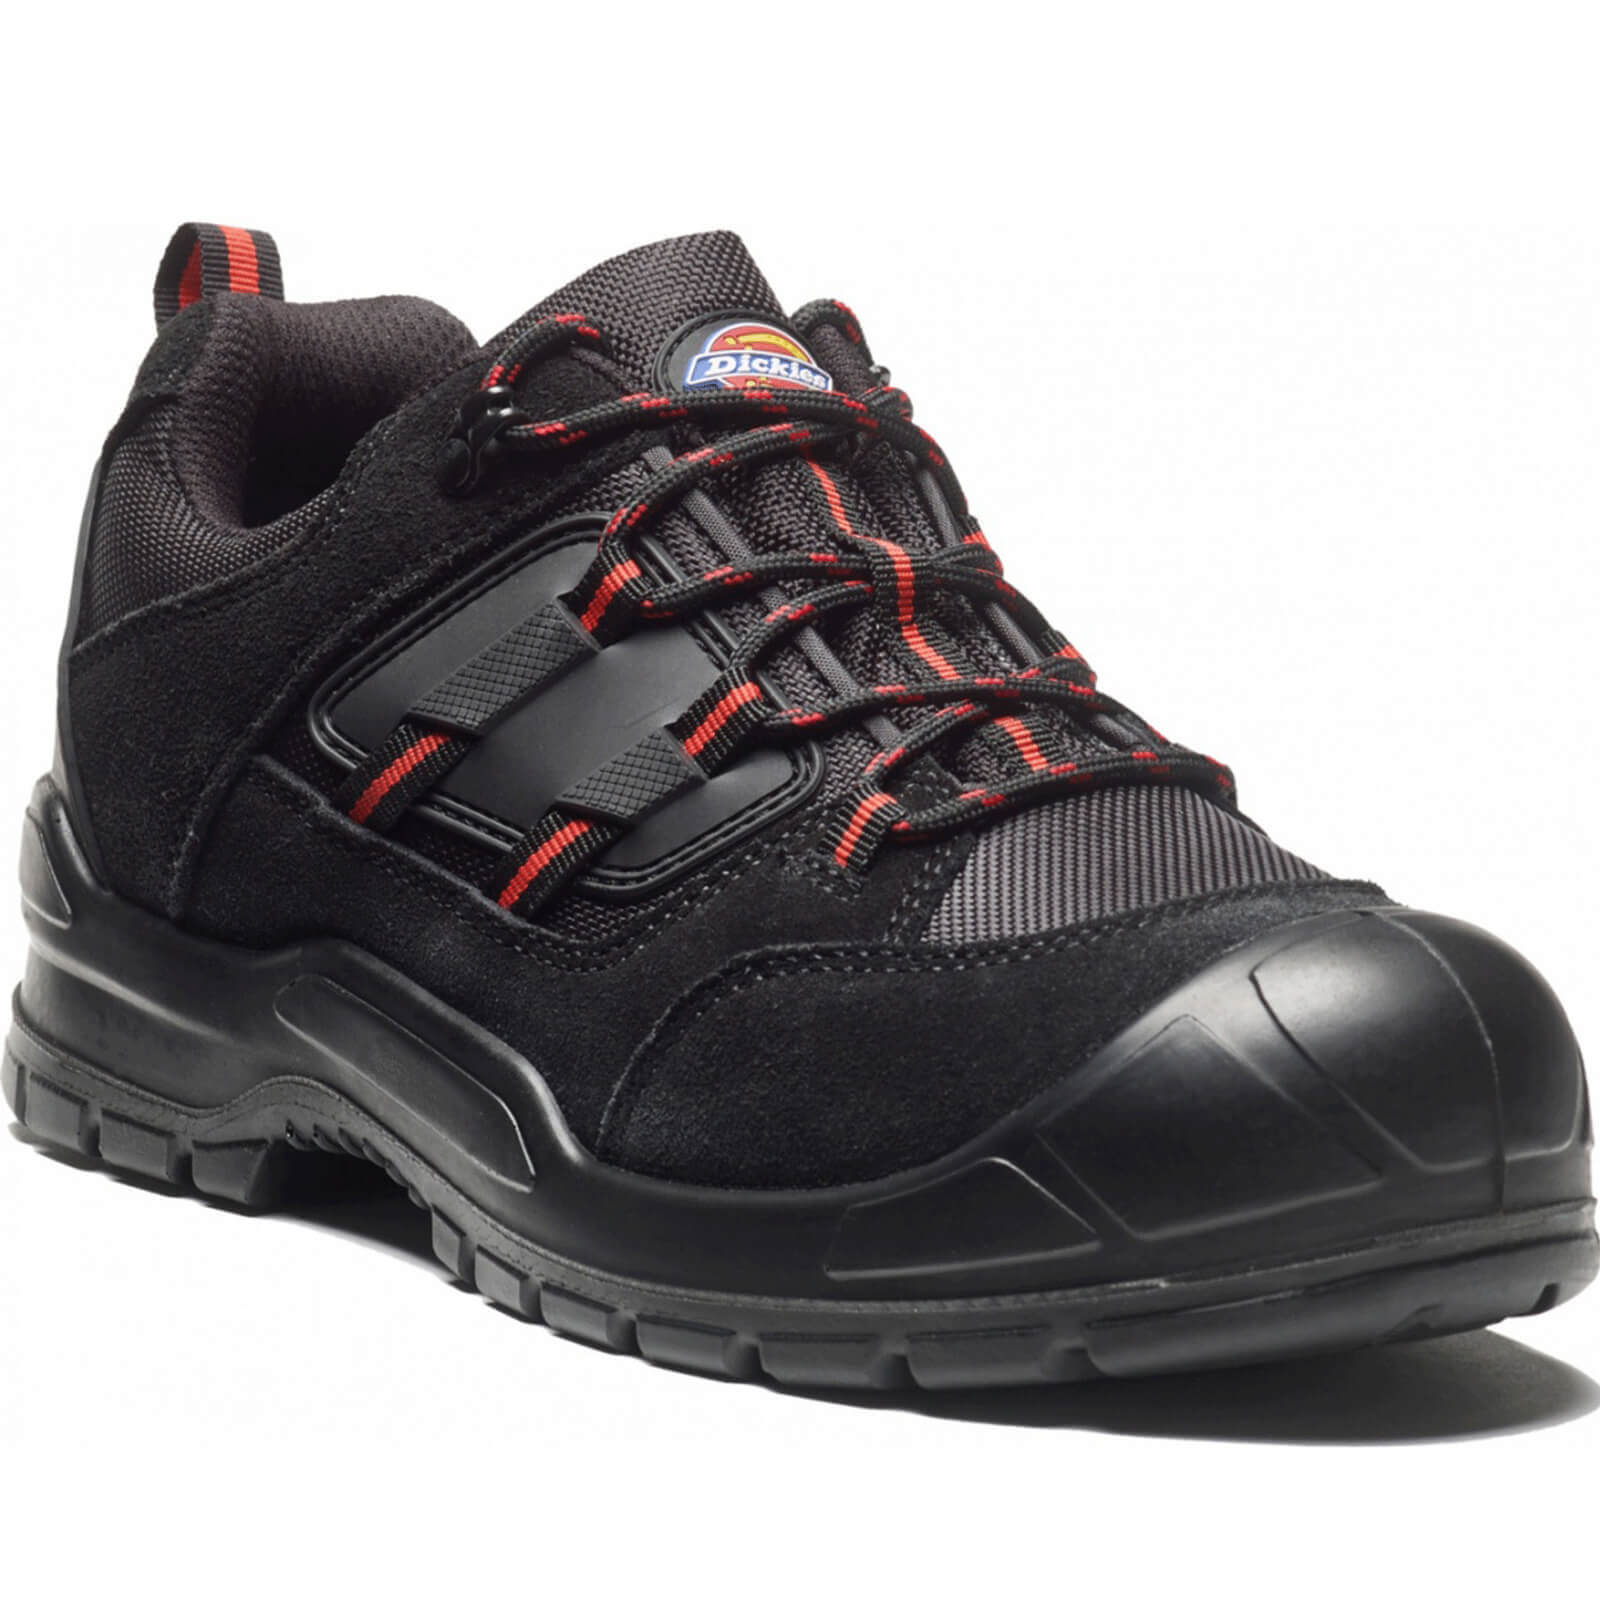 Image of Dickies Everyday Safety Shoe Black Size 7